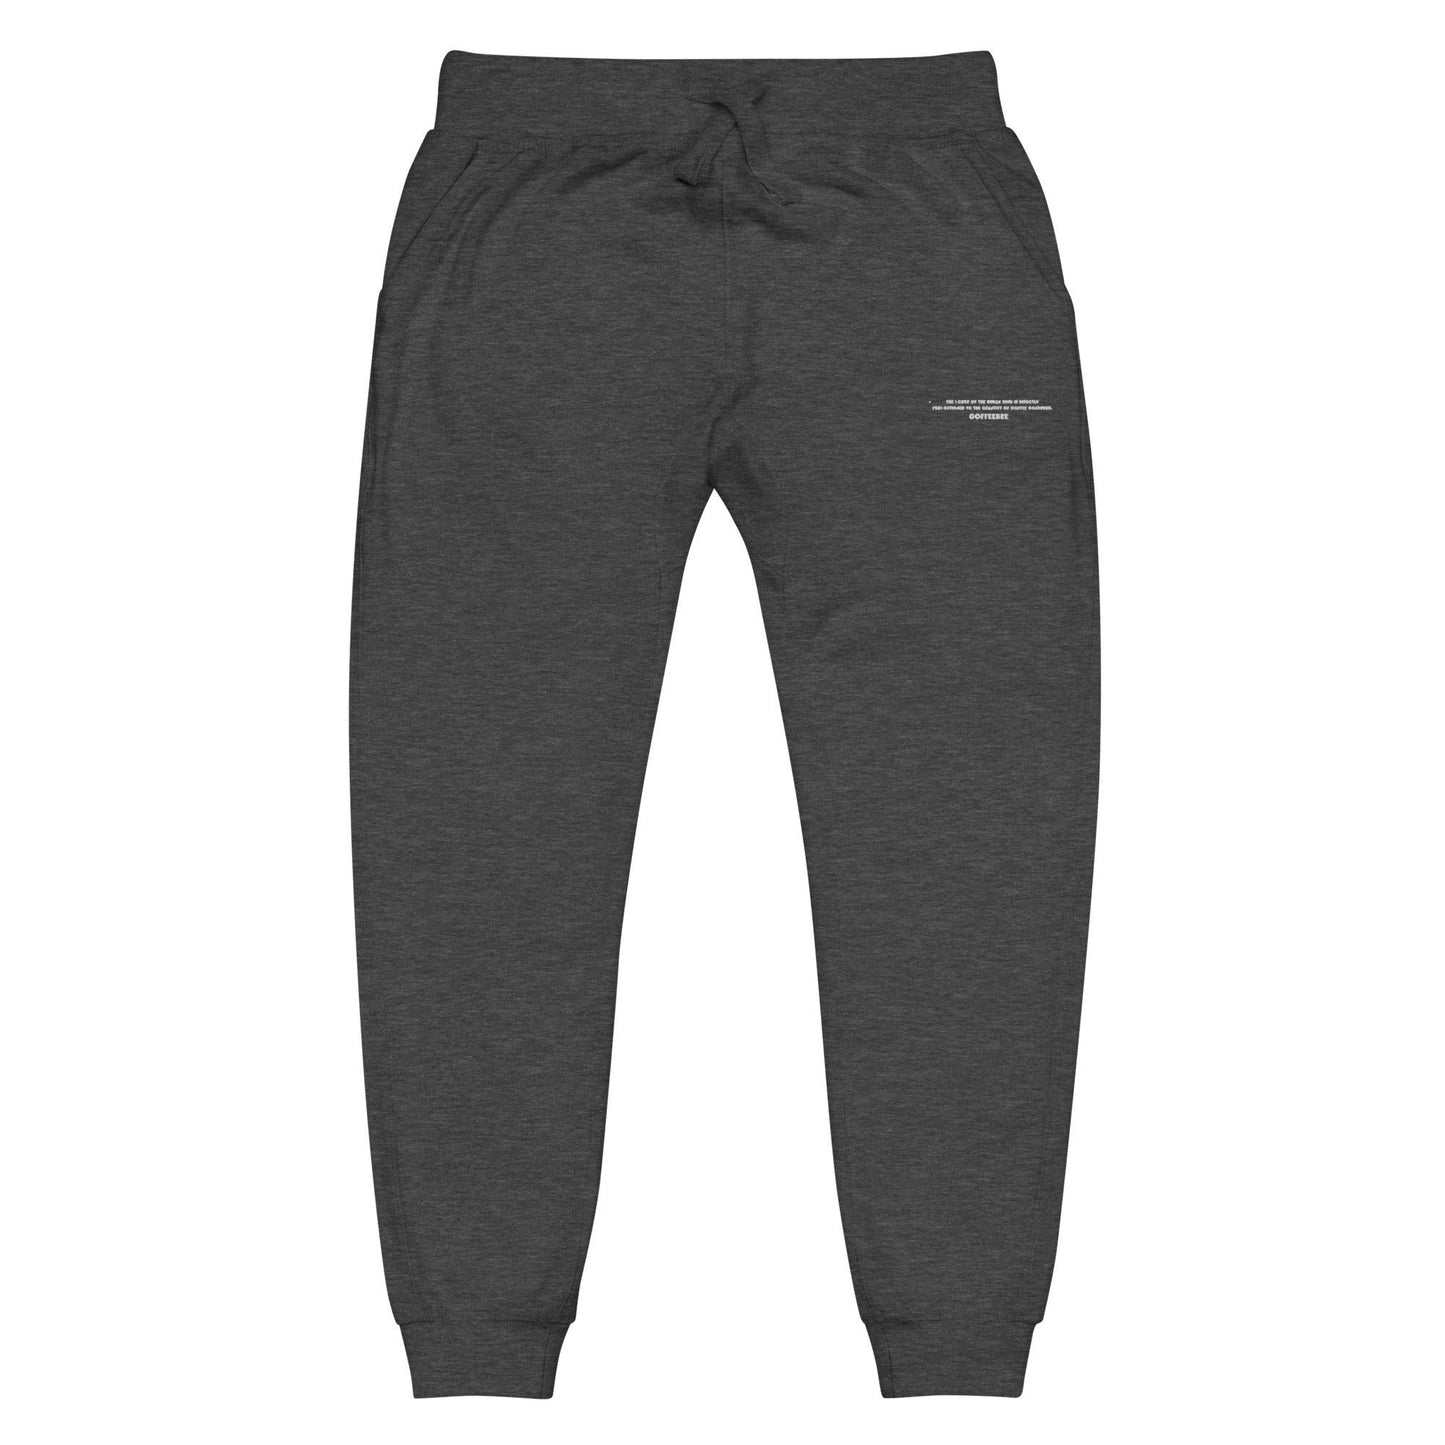 Embroidered Ribbed Waist Unisex Sweatpants